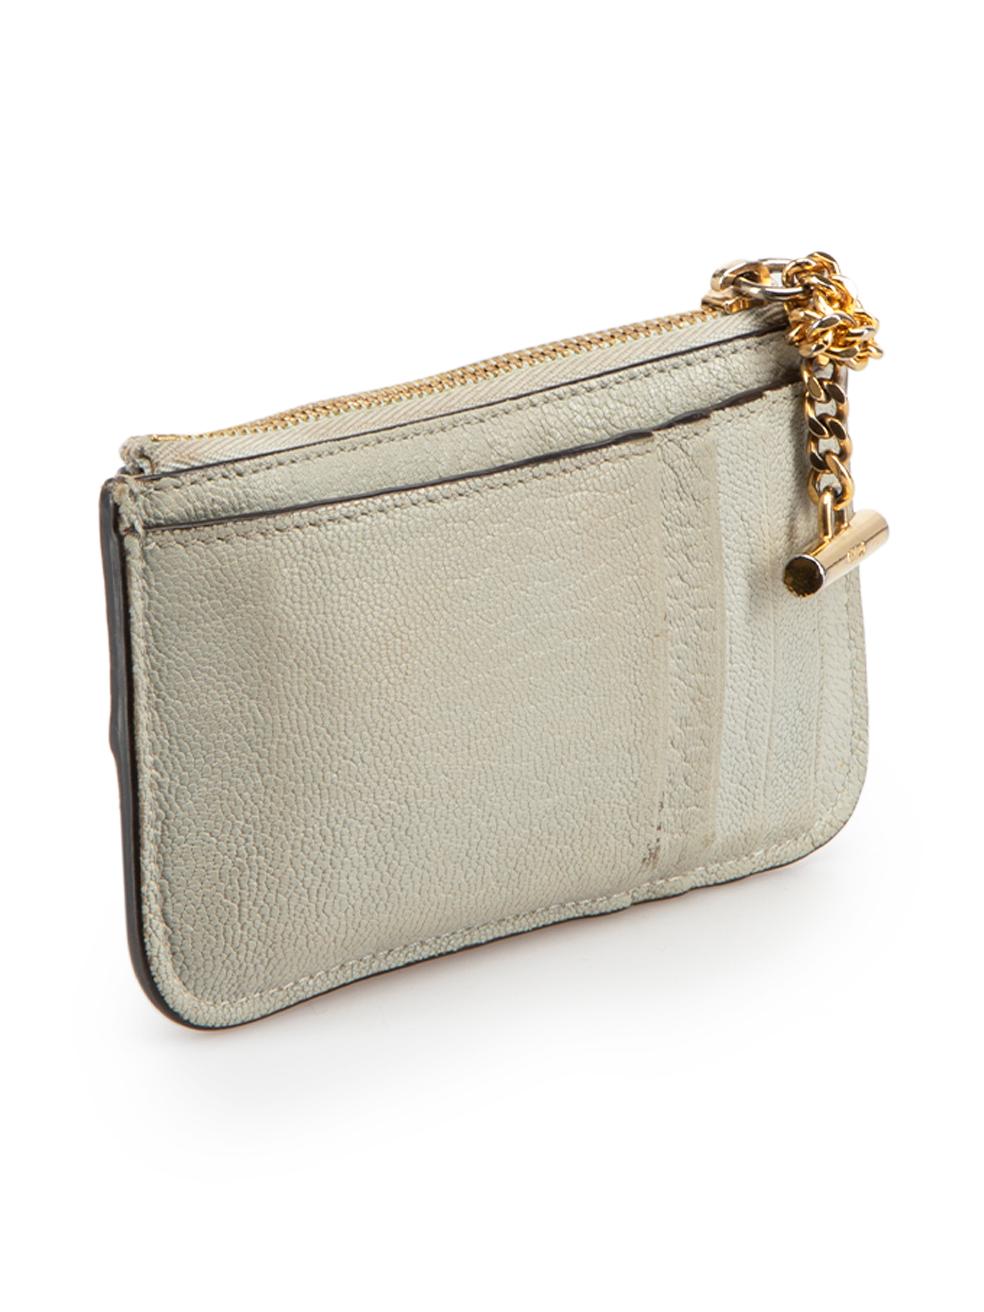 CONDITION is Good. Minor wear to purse is evident. Light wear to the chain hardware with tarnishing on this used Chloé designer resale item.





Details


Grey

Leather

Card holder

Gold tone hardware

1x Main zipped compartment

1x External slip